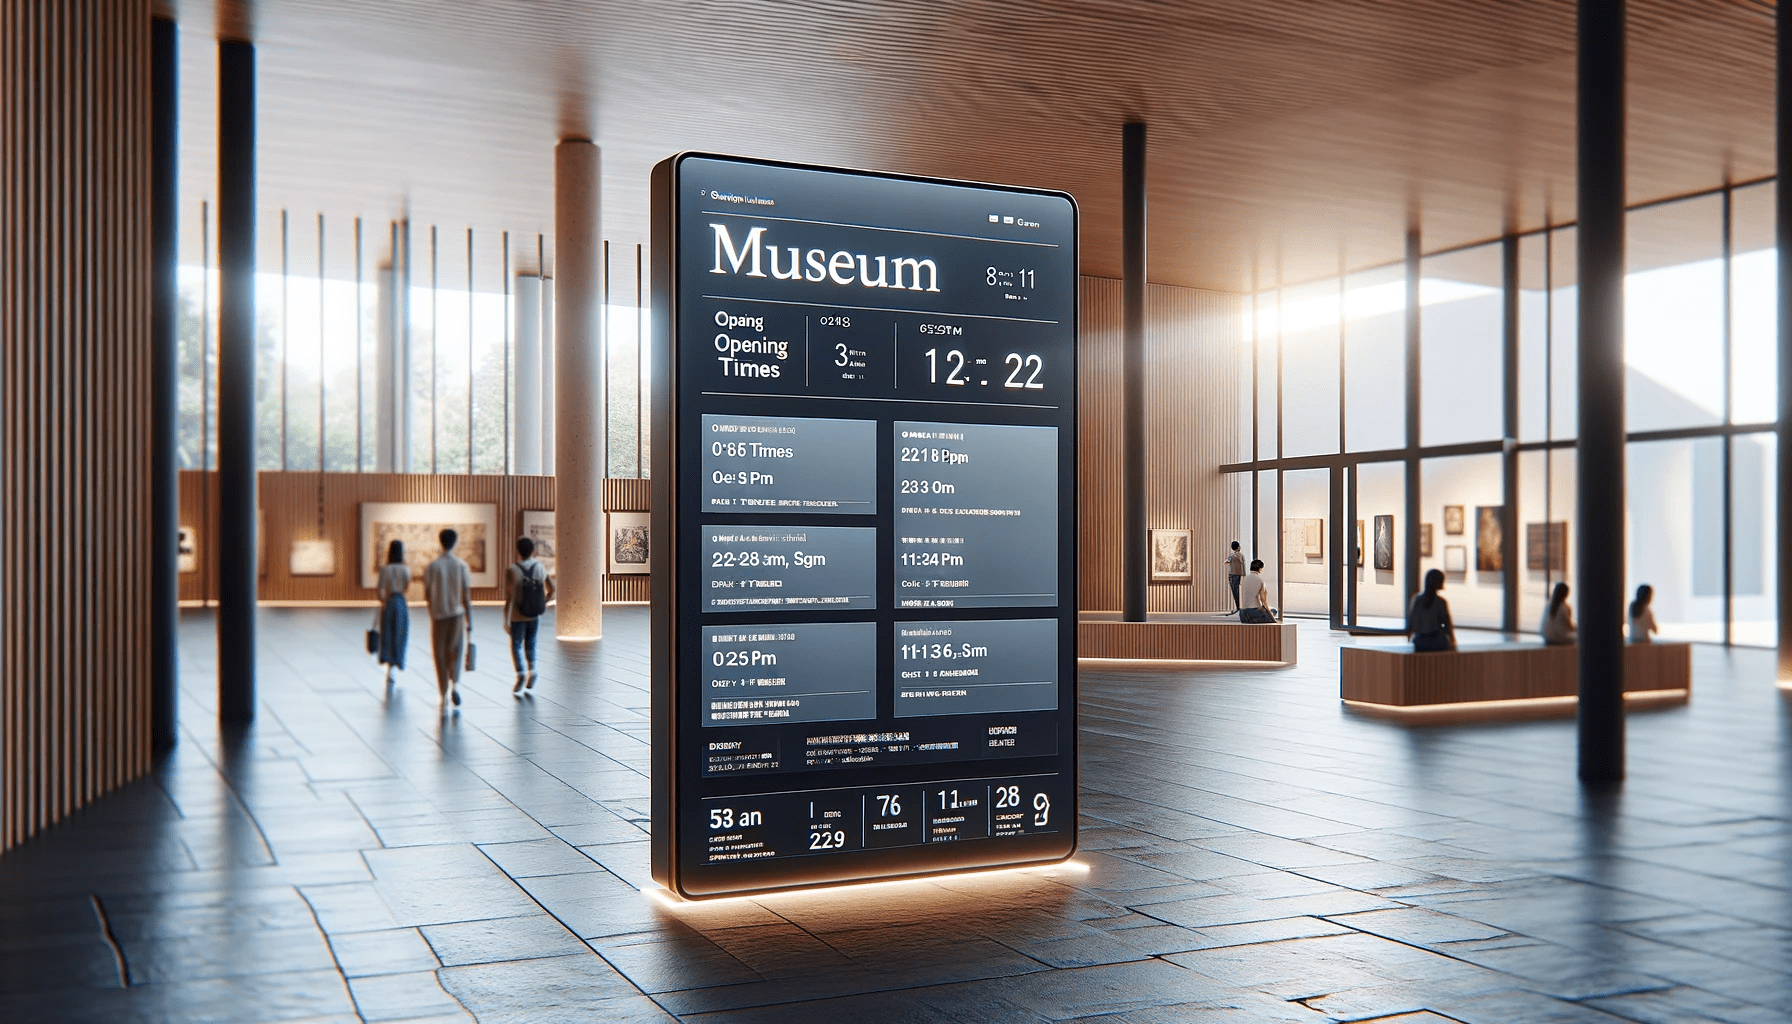 A modern digital display in a museum, presenting opening times and event schedules, with visitors visible in the background, highlighting accessible information in a public setting.